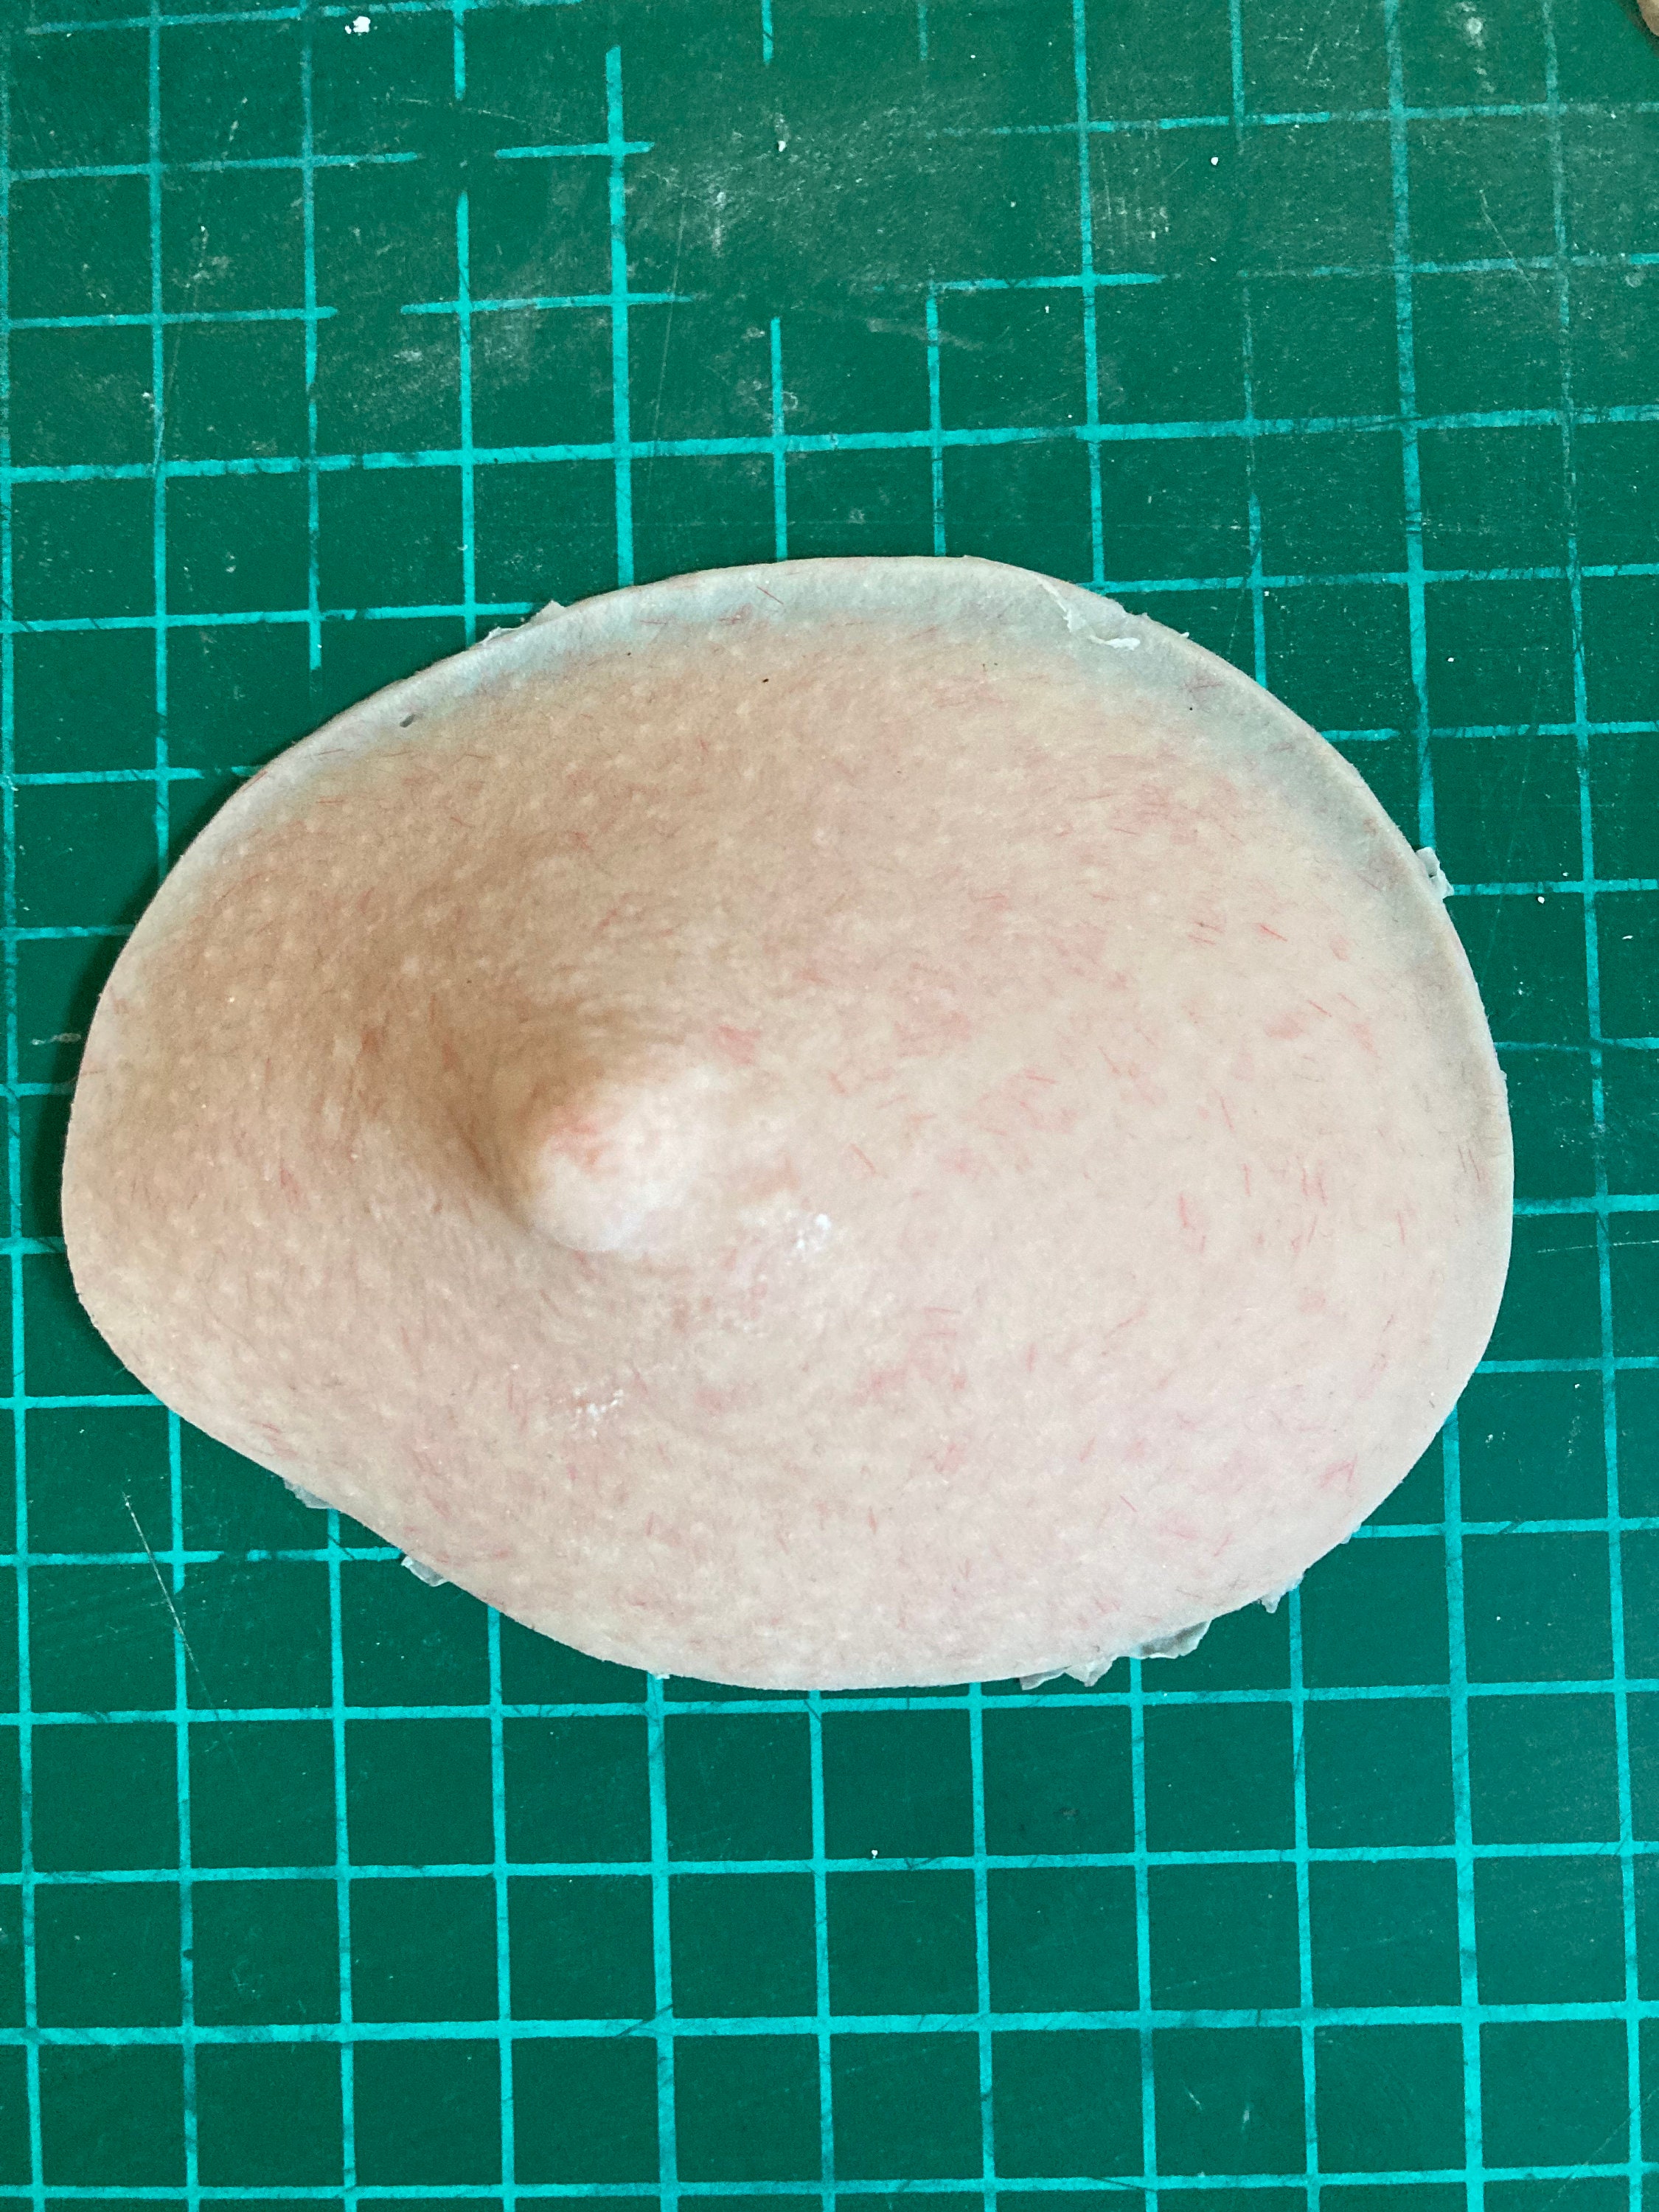 Silicone Breast Prop for Use in Film, Tv, Stage or Cosplay. 